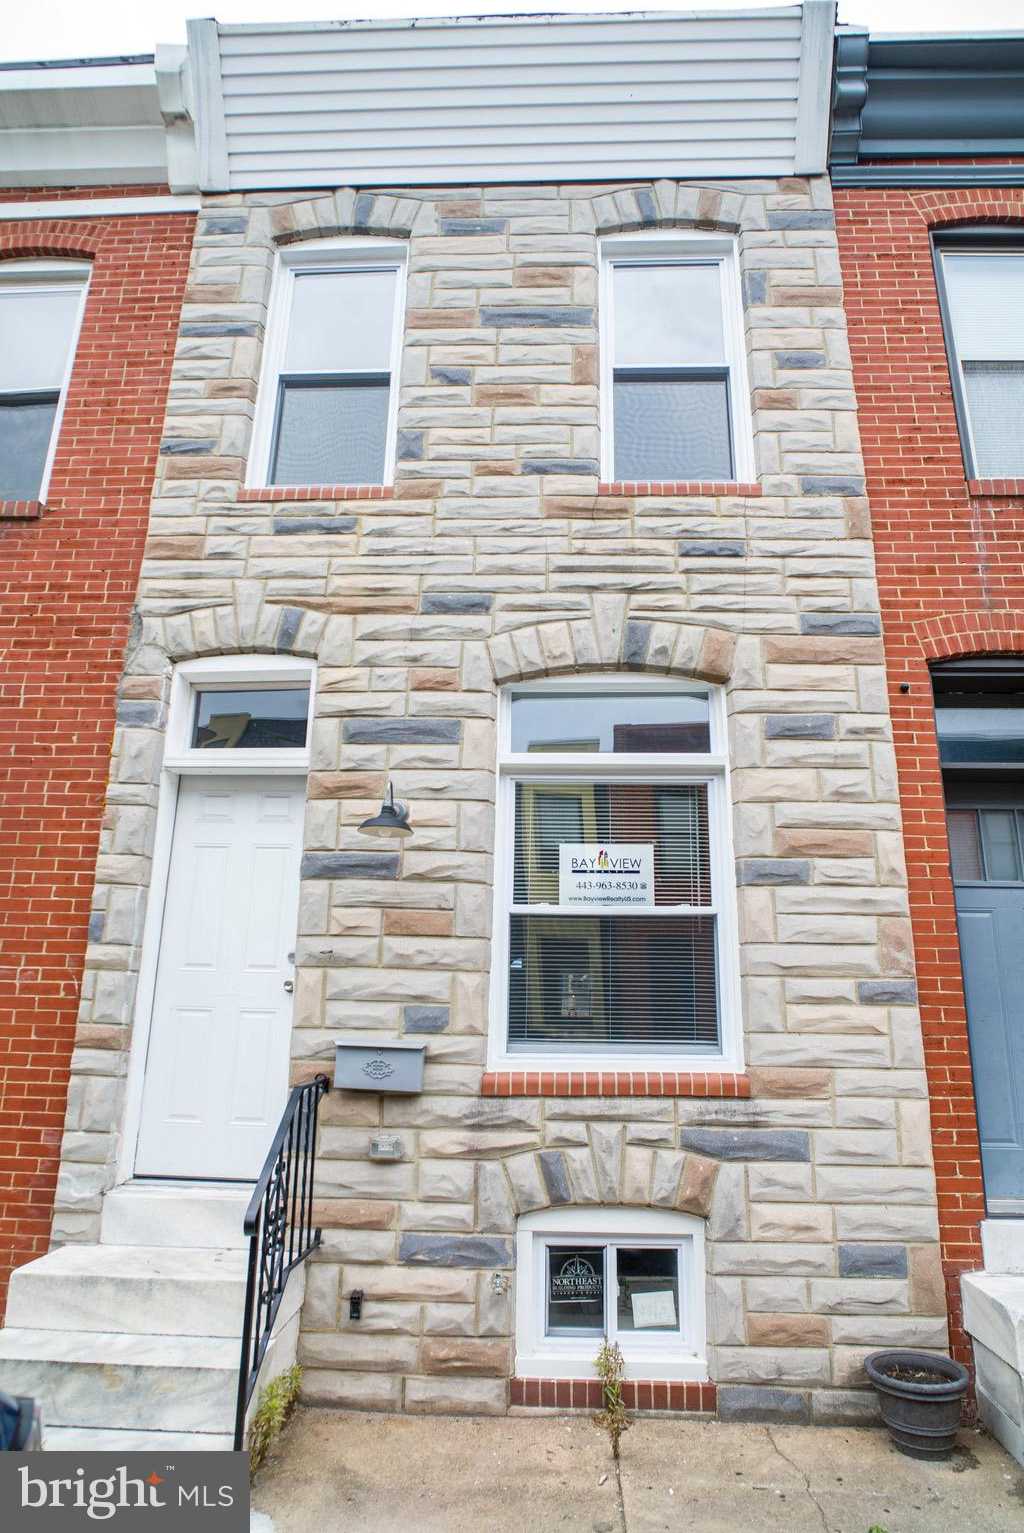 View BALTIMORE, MD 21224 townhome